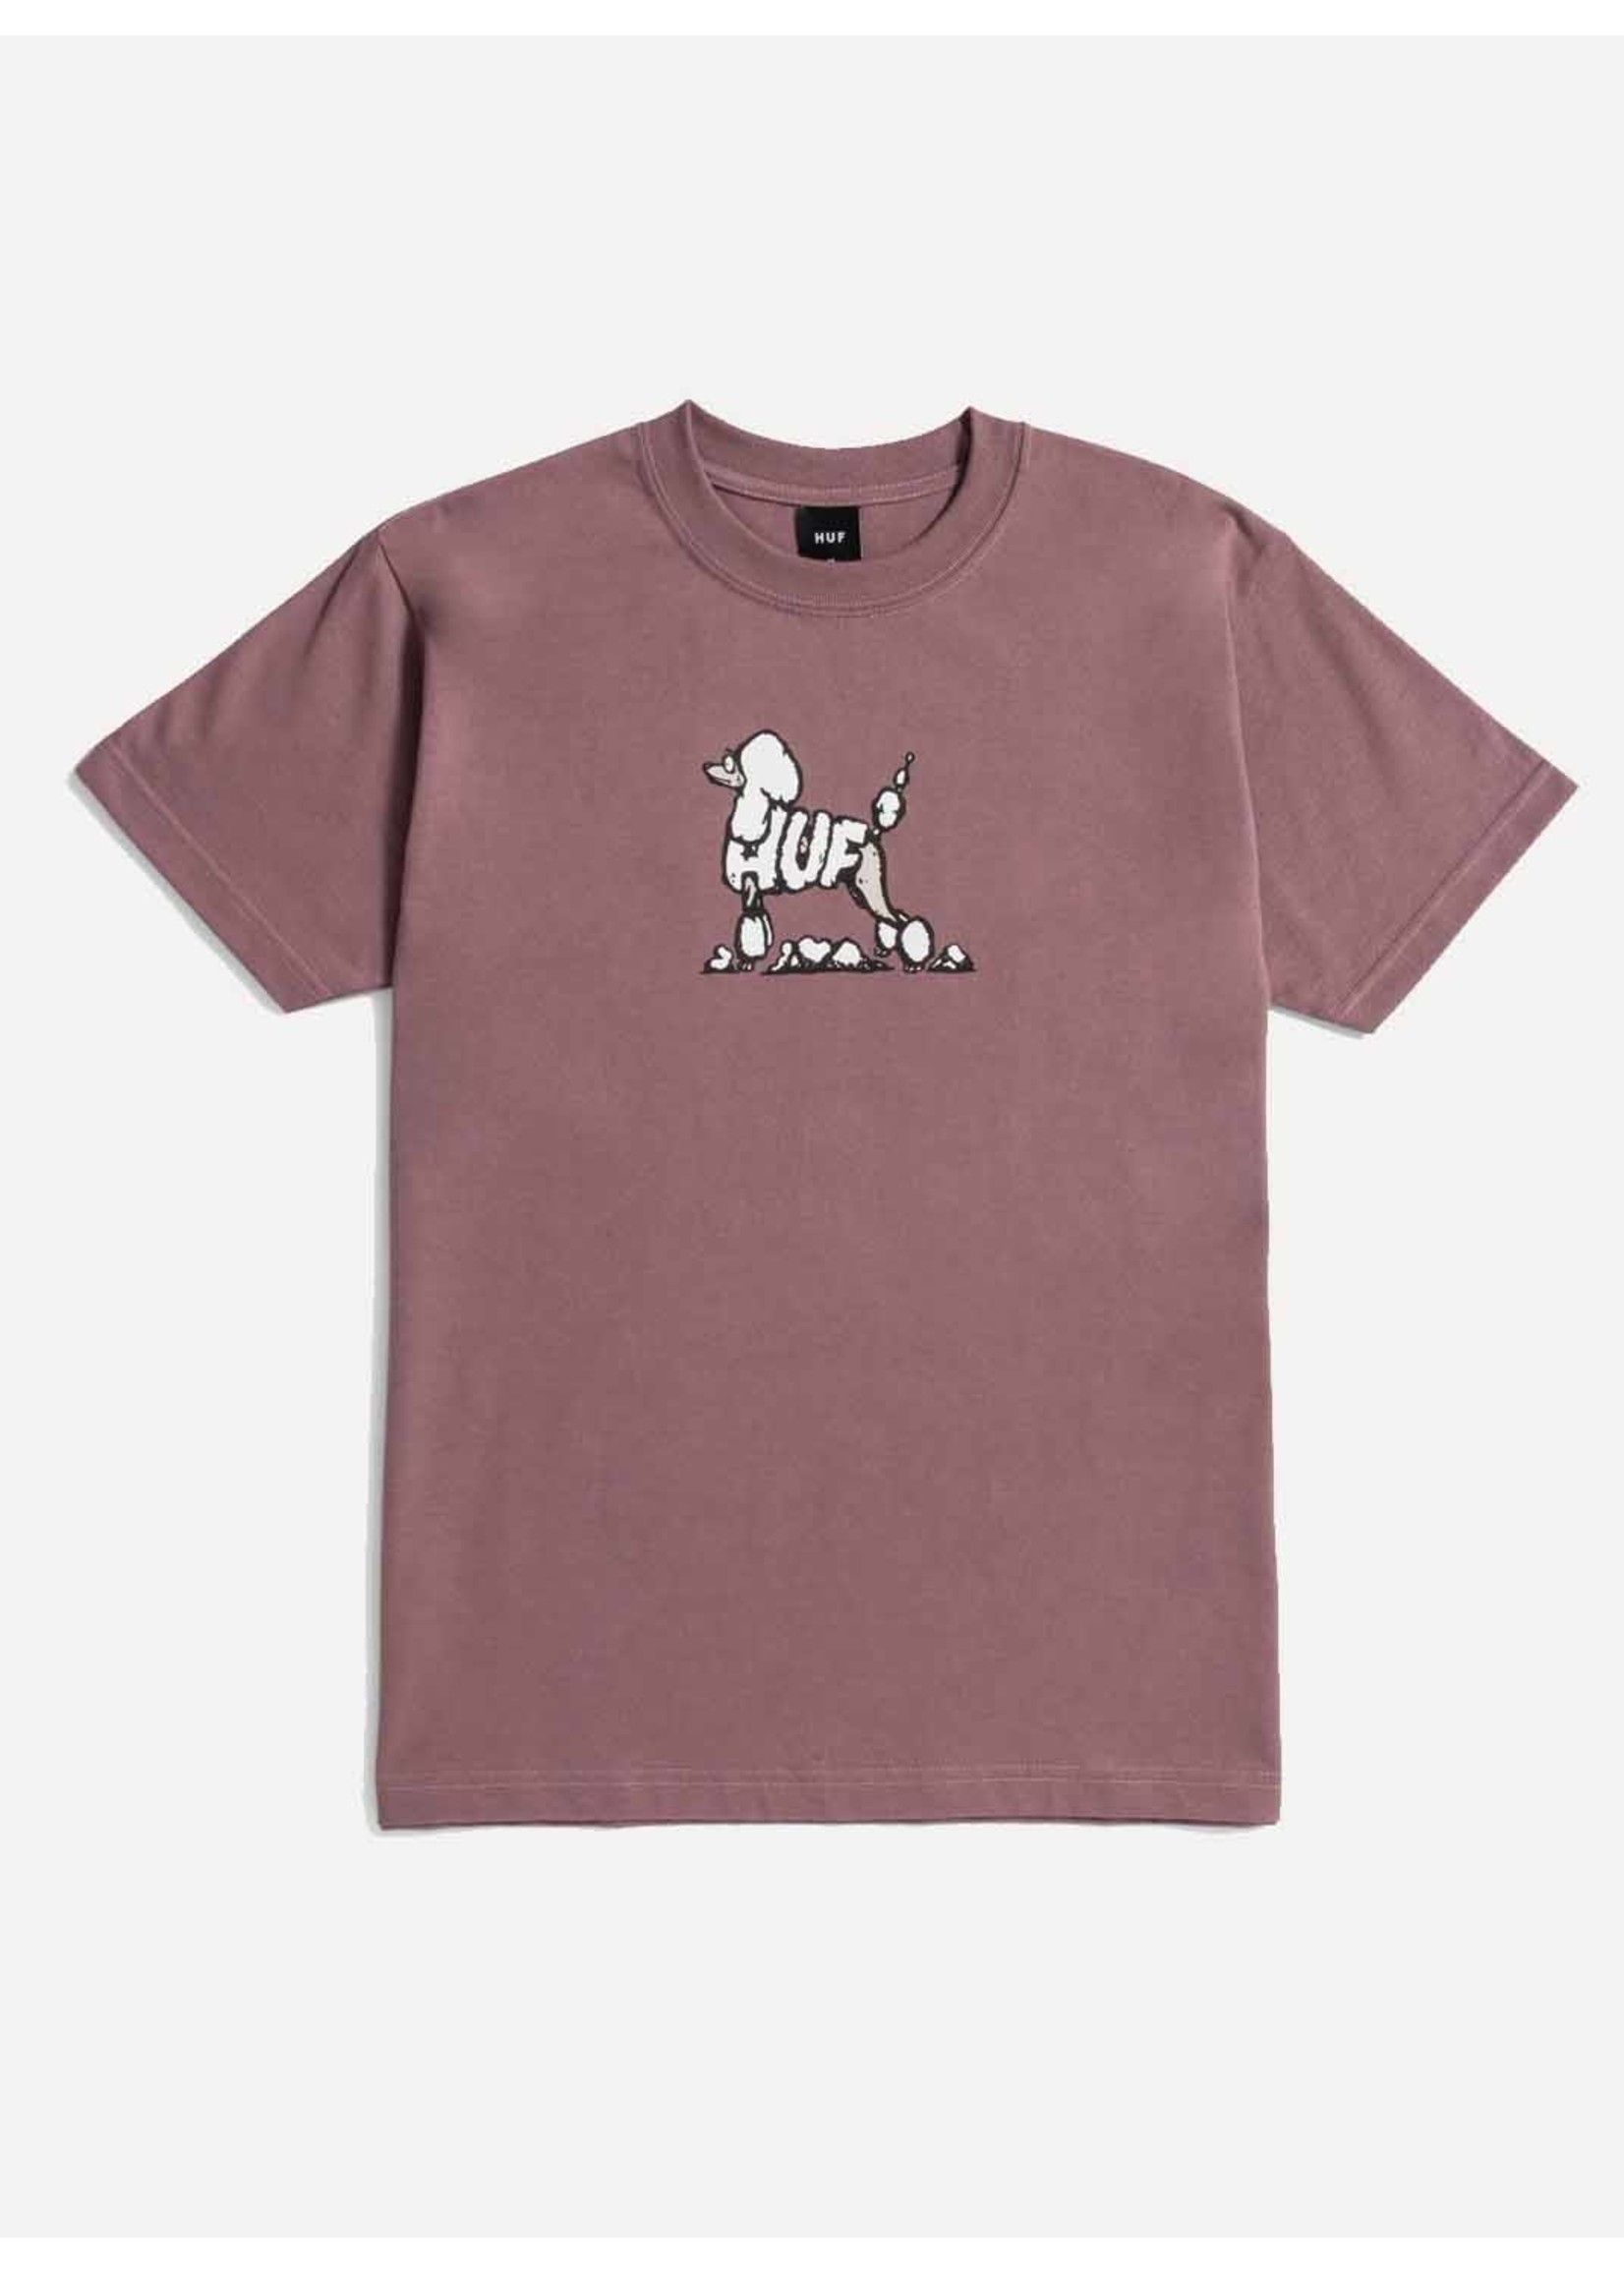 HUF Best In Show S/S Tee Mauve TS01966-MAUVE